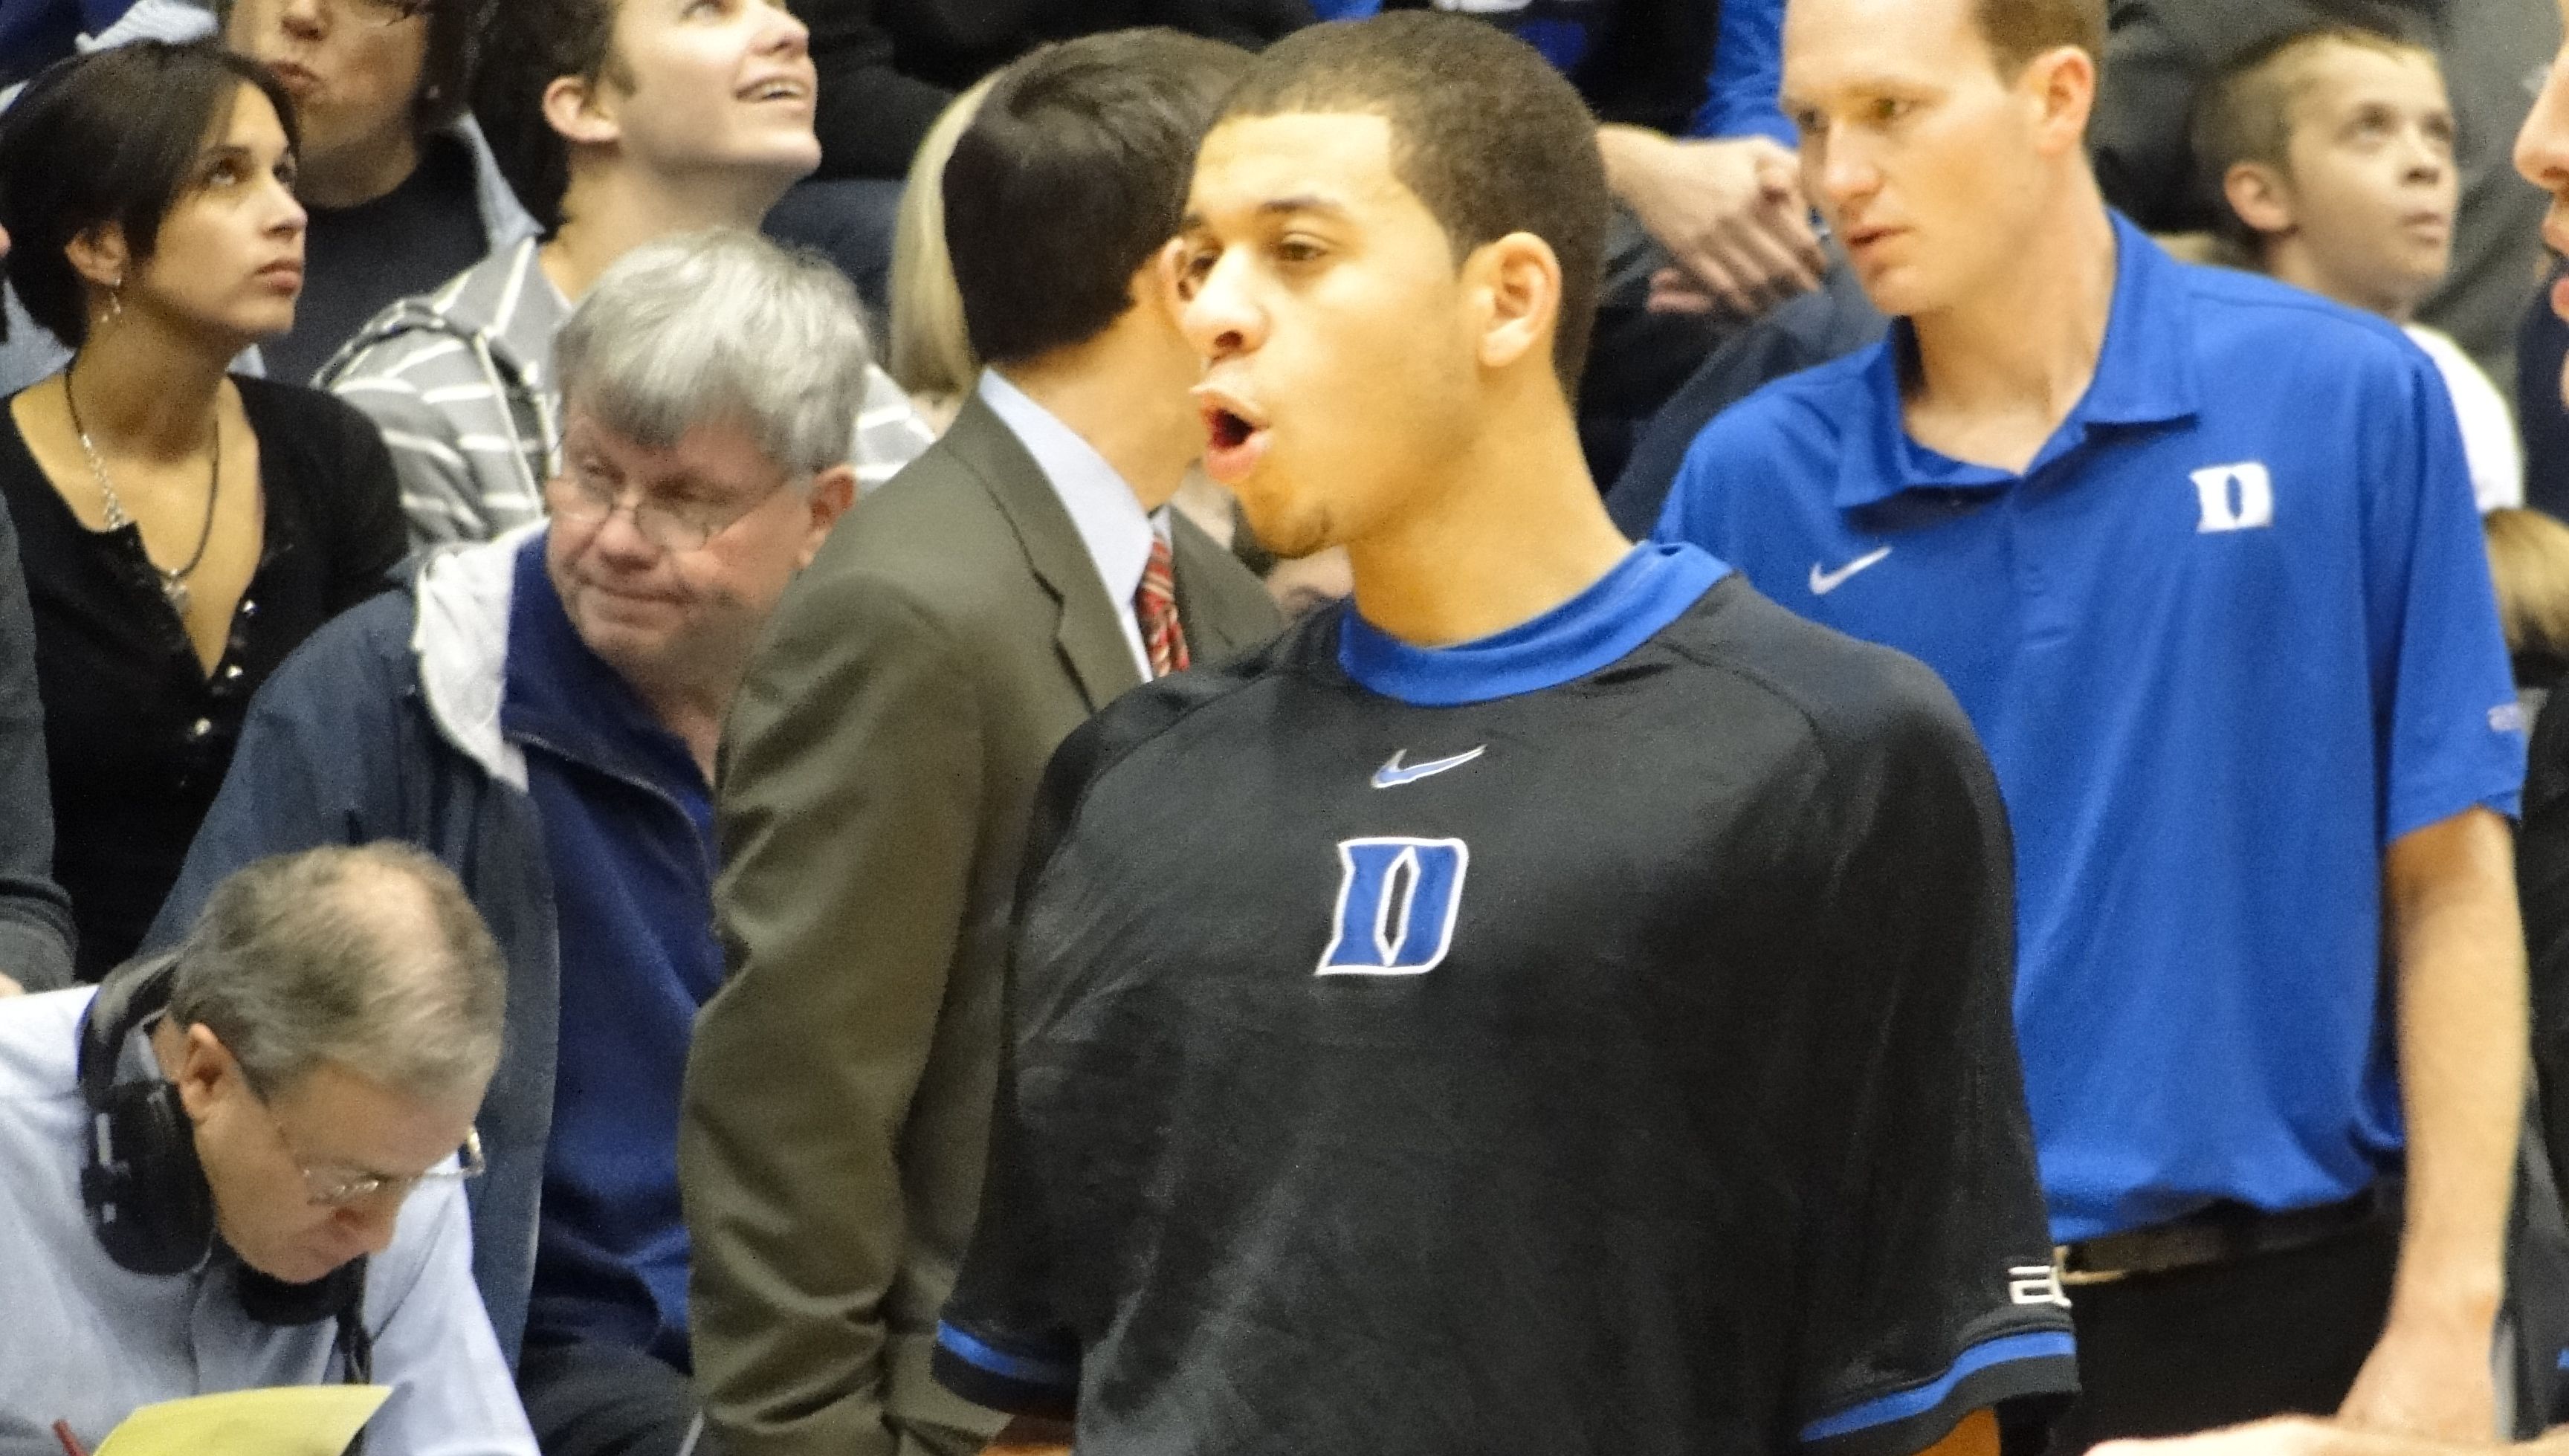 Seth Curry wearing Duke's warm up suit